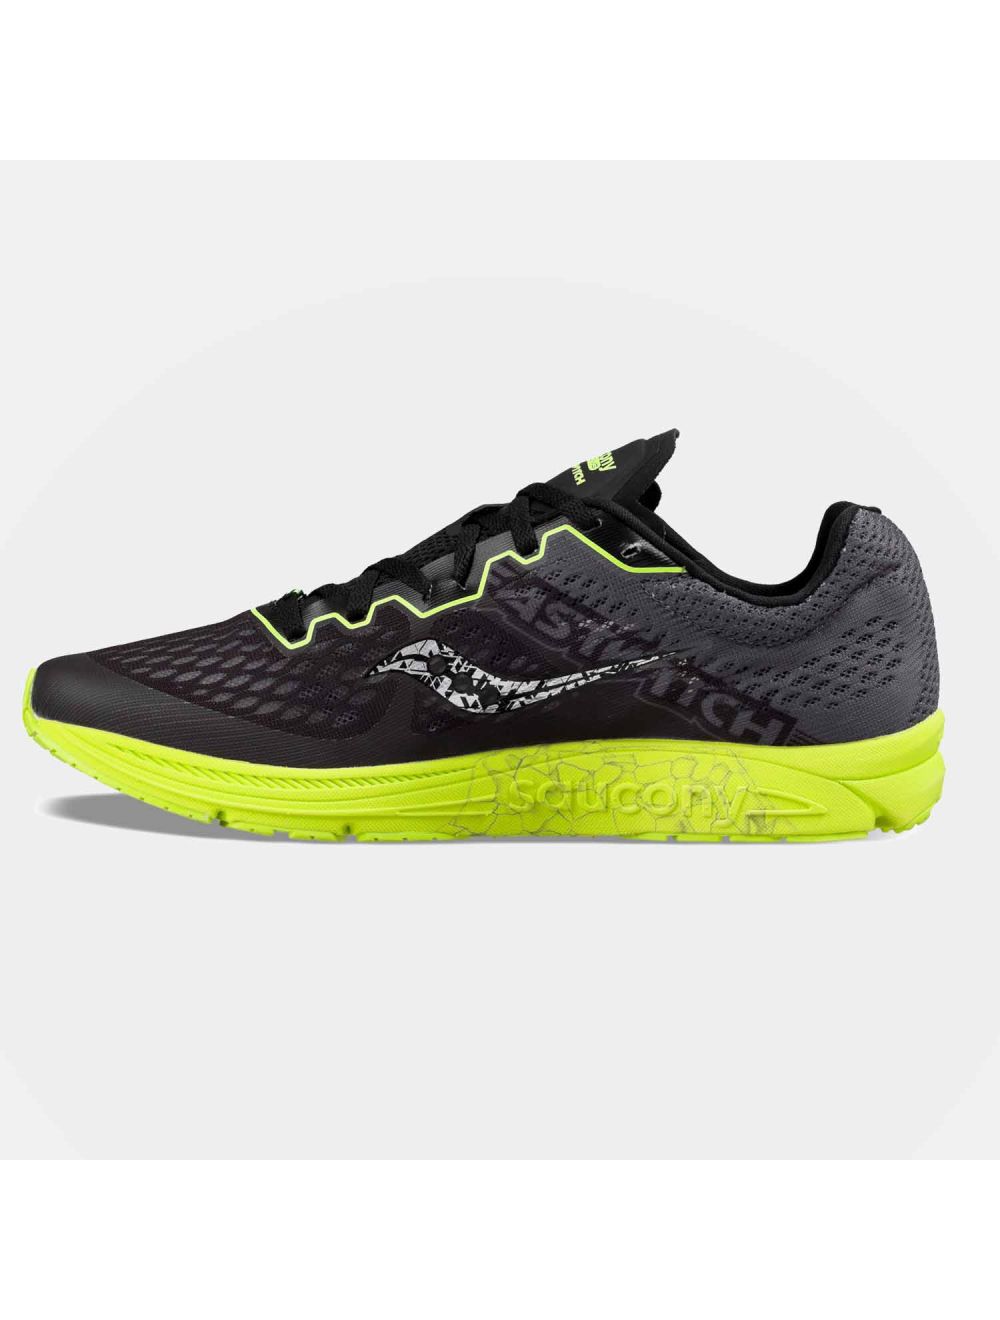 saucony fastwitch 8 mens